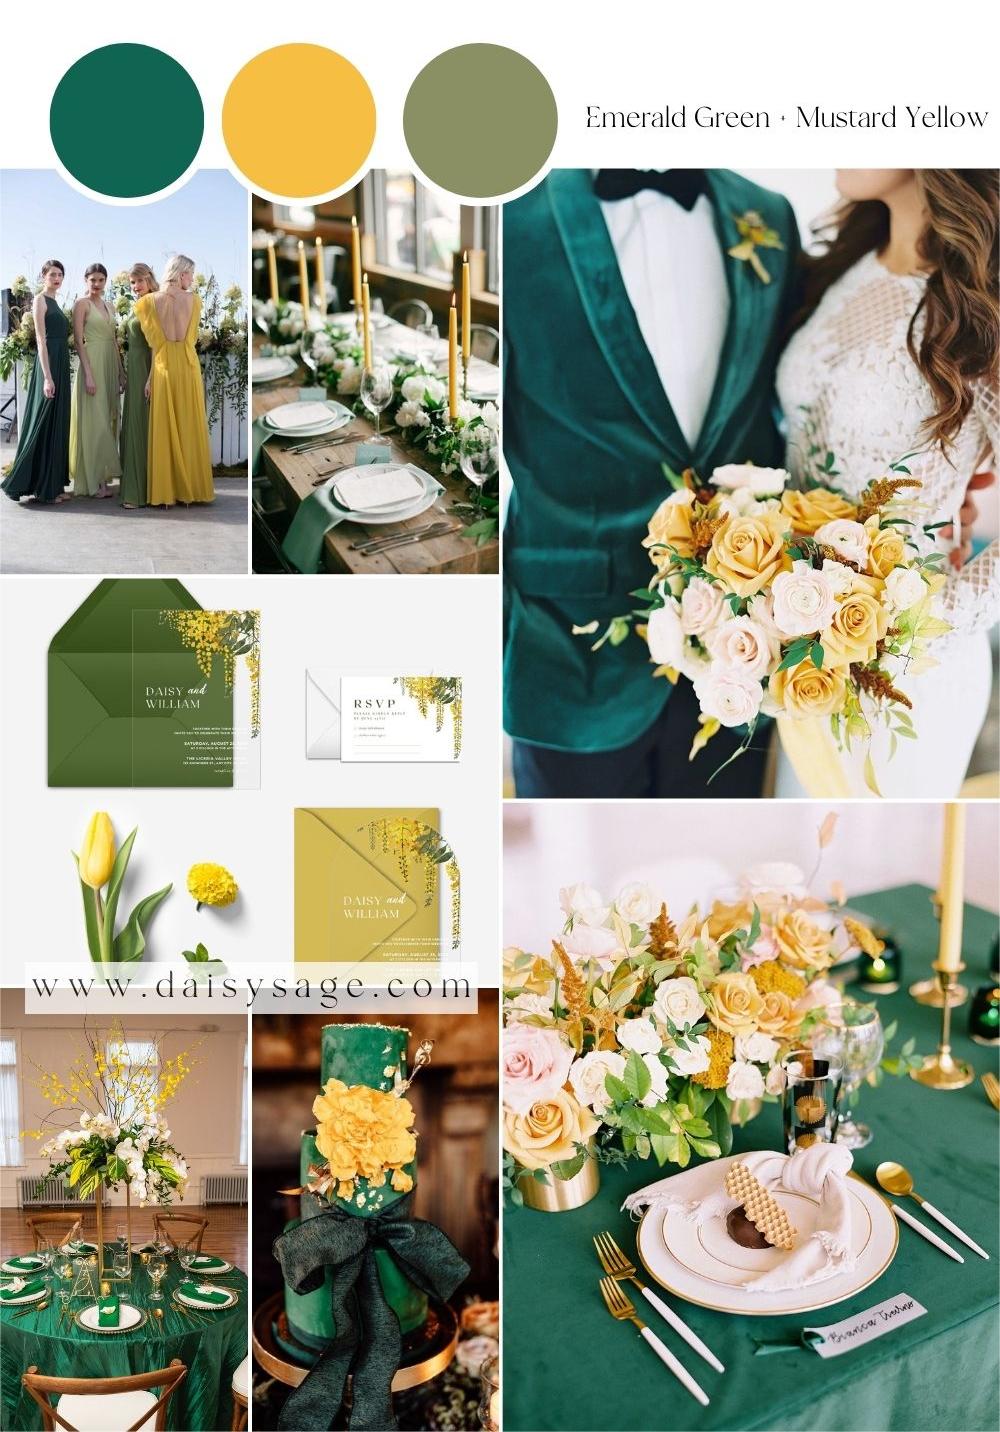 Emerald Green and Mustard Yellow Wedding Color Palette